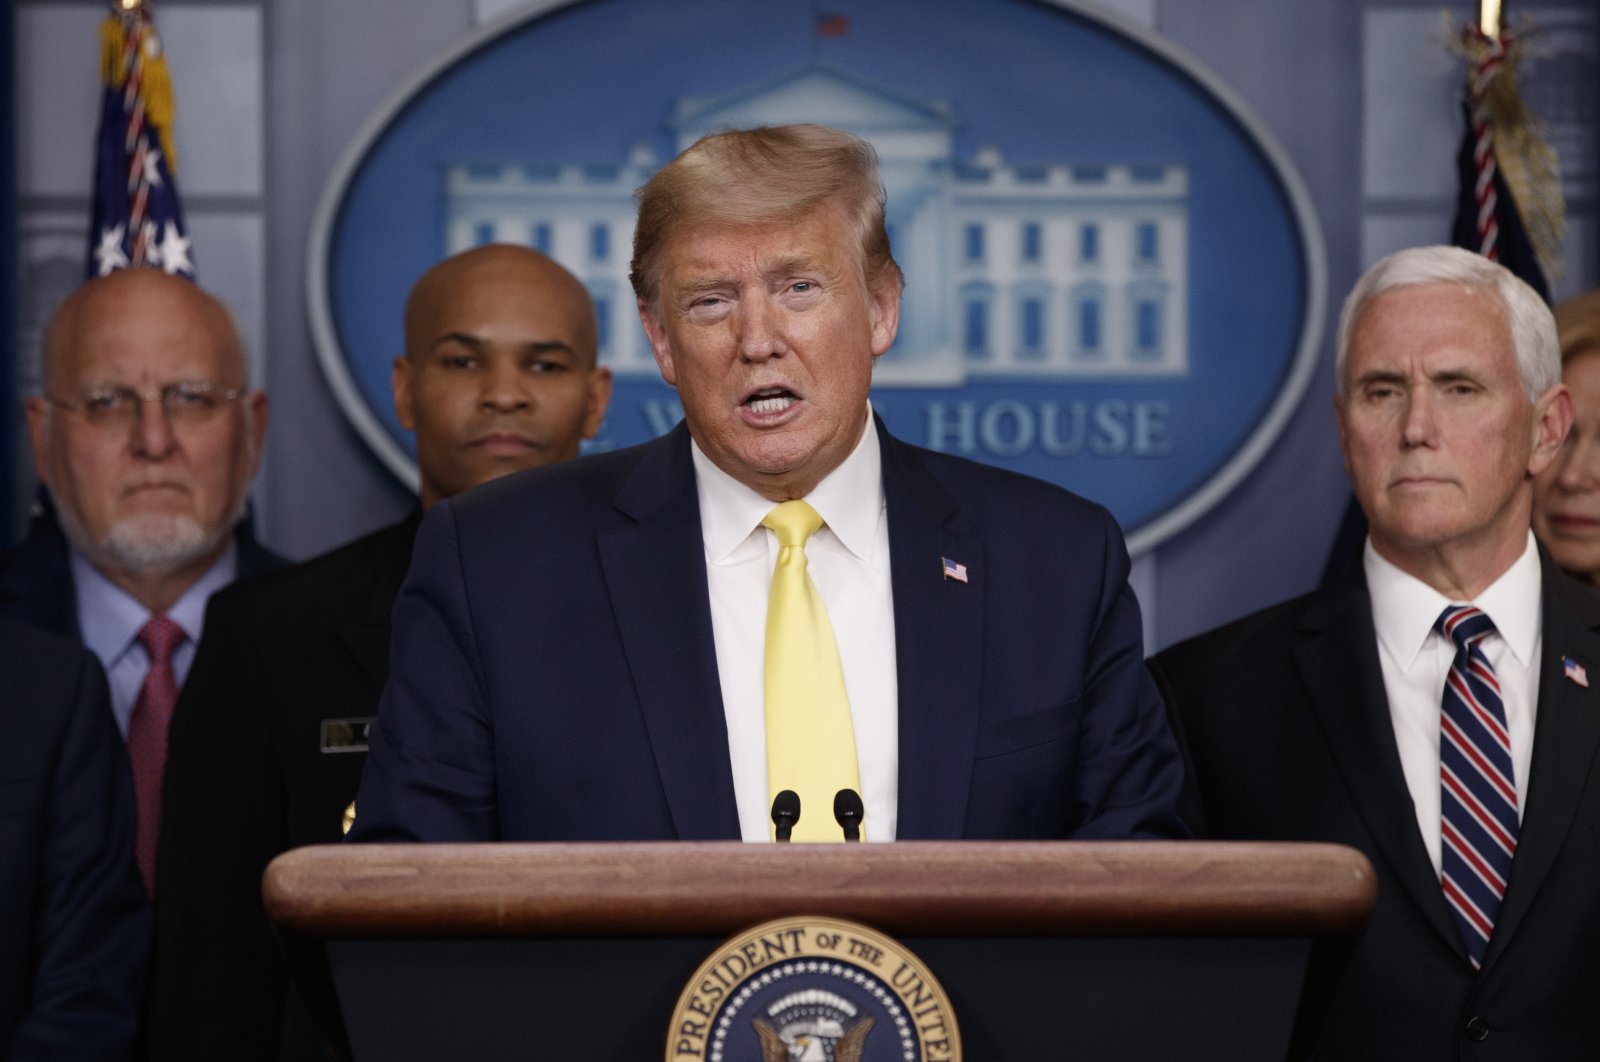 The U.S. President Donald Trump speaks in the briefing room of the White House, Washington, March 9, 2020. (AP Photo)